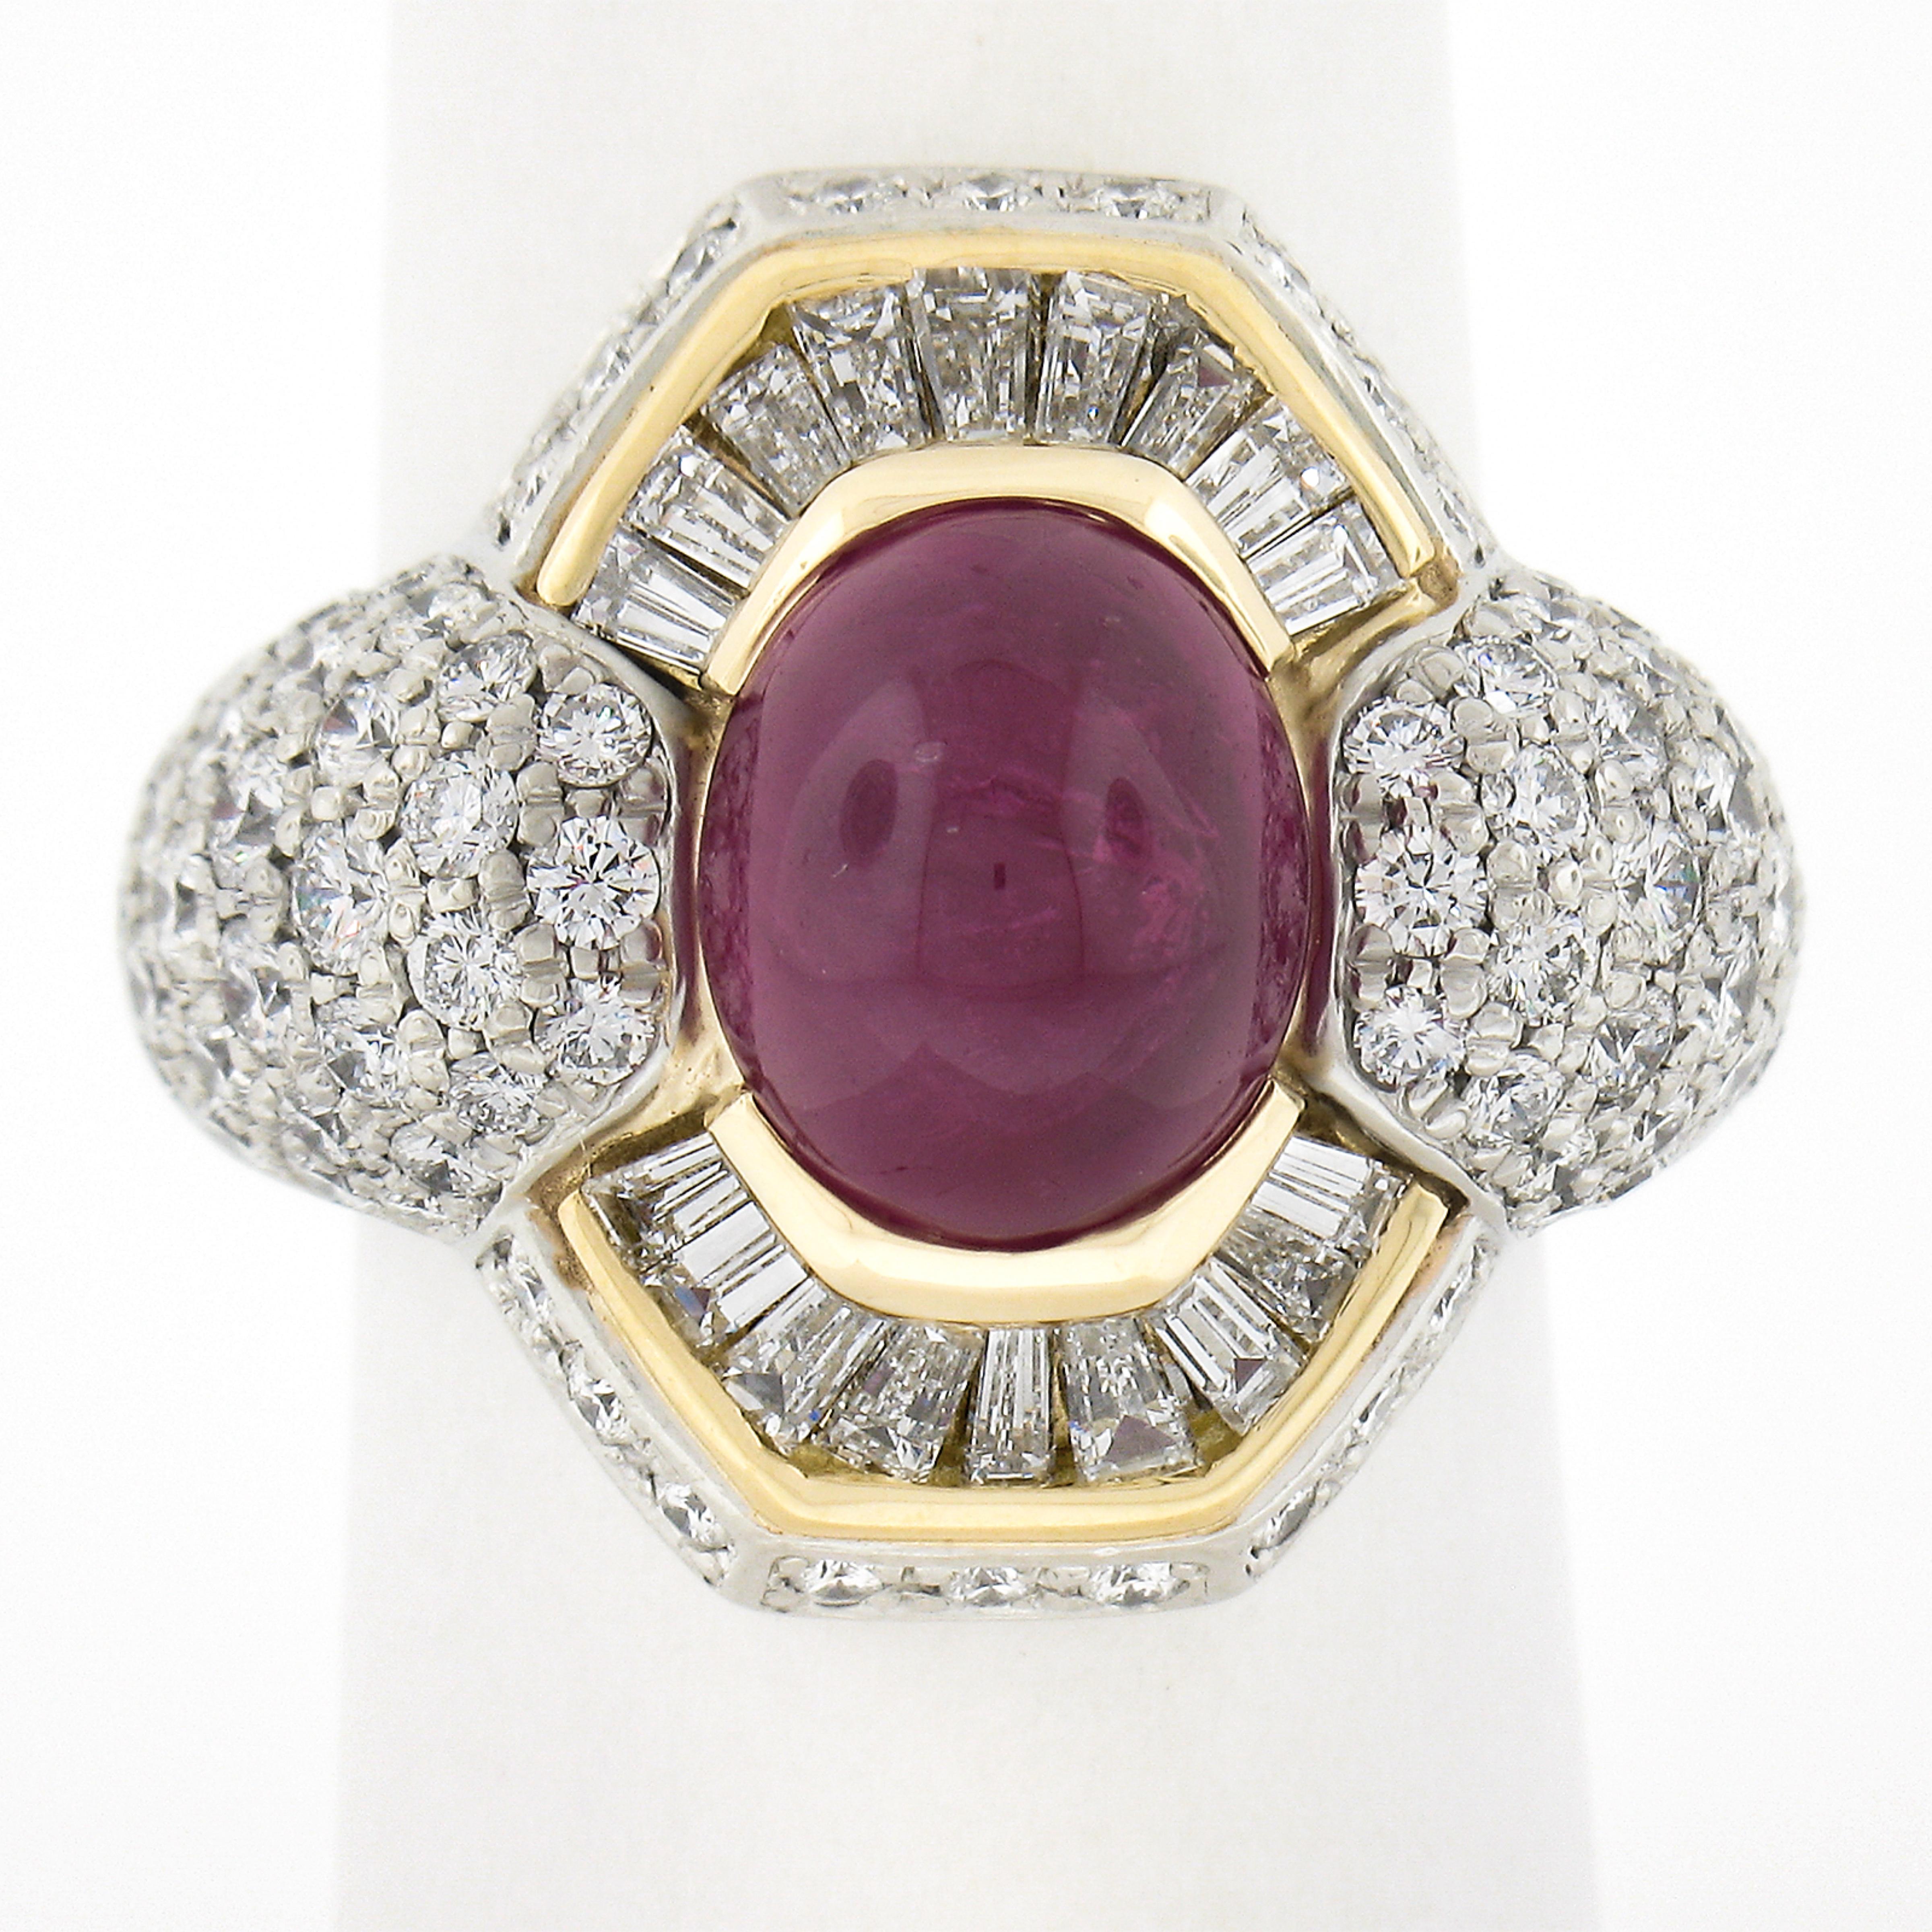 This is a truly breathtaking, GIA certified, genuine ruby vintage ring crafted in solid 18k yellow gold & platinum featuring an oval double cabochon cut ruby solitaire with an outstandingly rich purplish-red color. The 5.81 carat ruby is a very